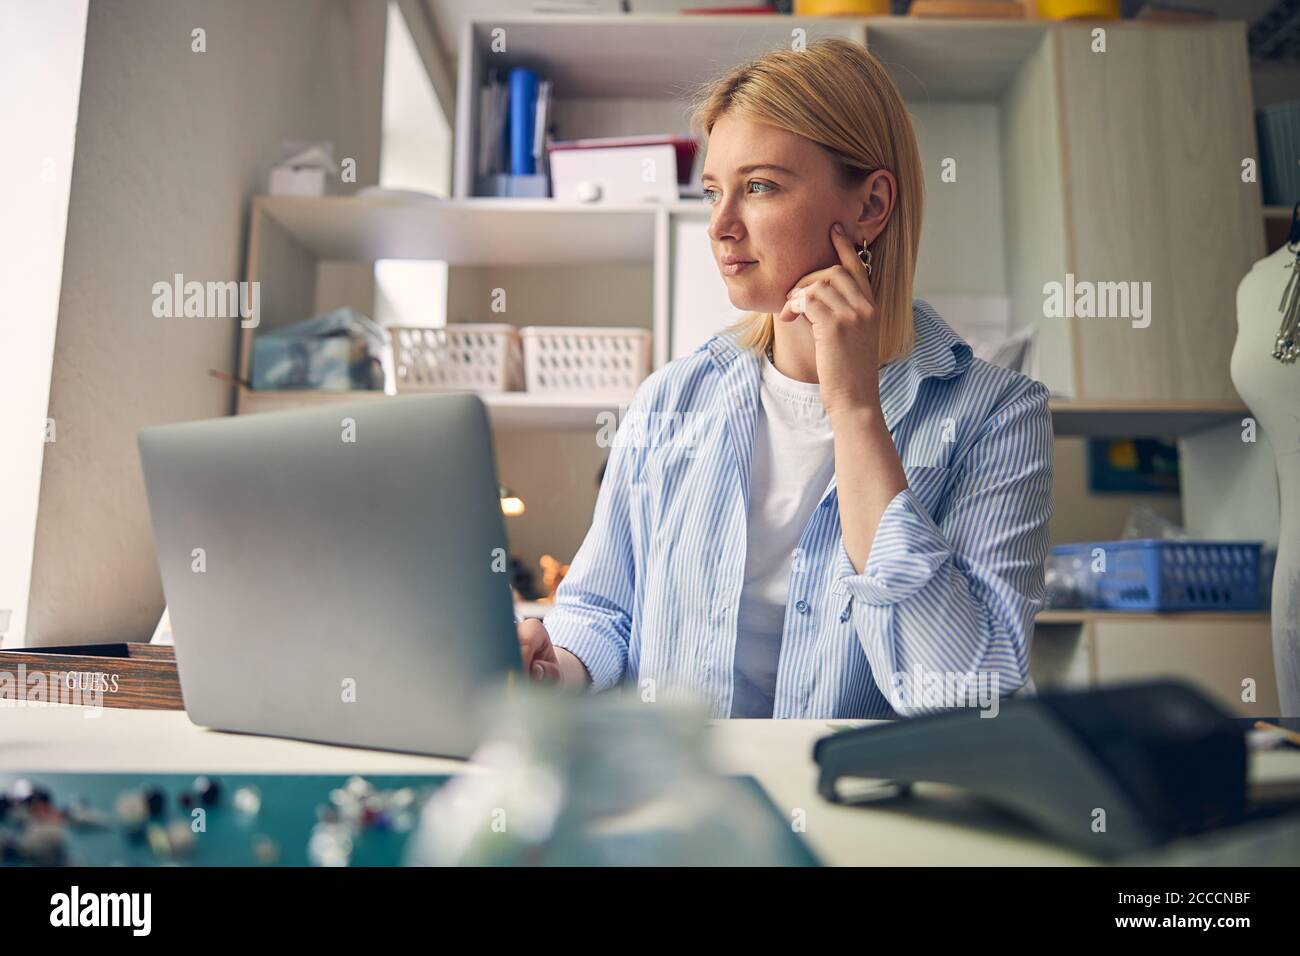 Contemplative glance of experienced employee in work room Stock Photo